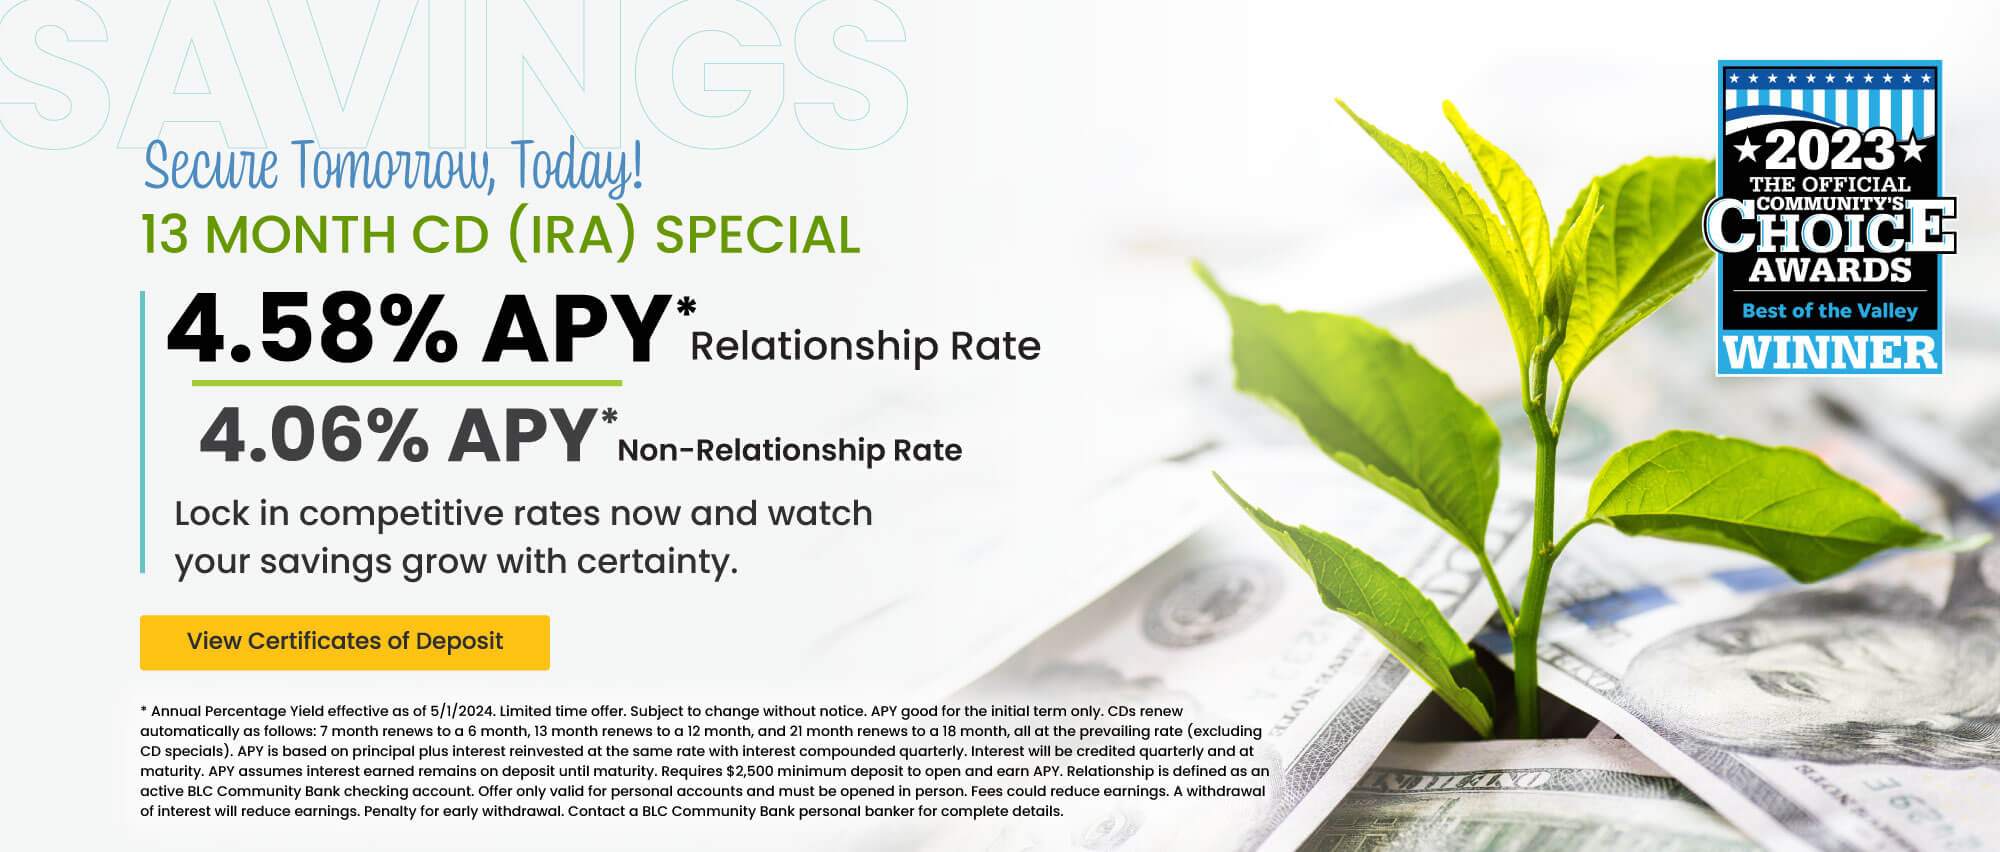 Secure Tomorrow, Today! 13 month CD (IRA) 4.58% APY* relationship rate 4.06% apy* non-relationship rate.  Click here to view certificates of deposit for details.